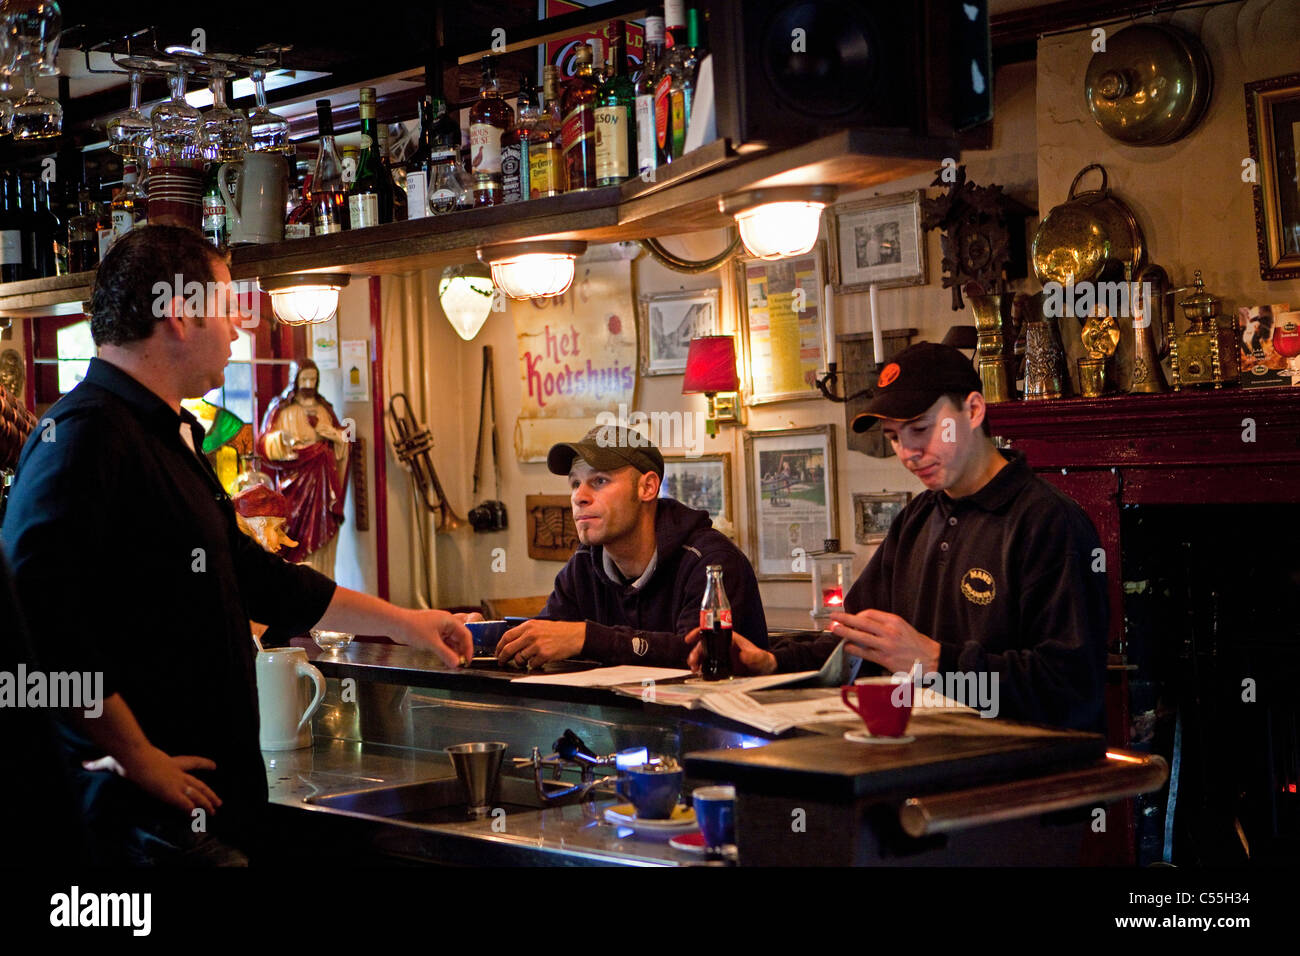 The Netherlands, Valkenburg, Barman talking with two boys in pub. Stock Photo